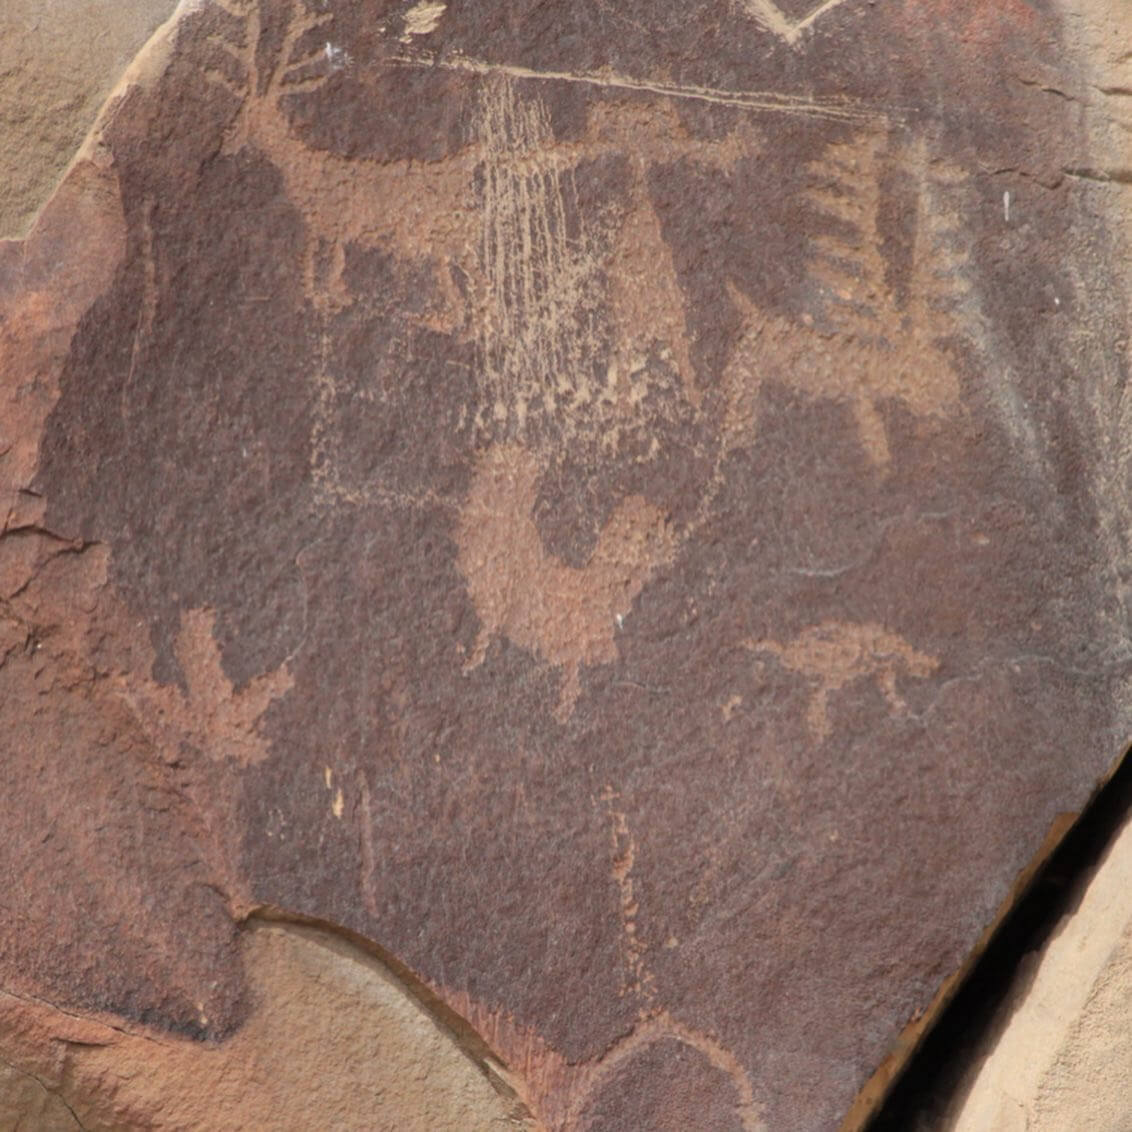 An up-close view of a series of petroglyphs at the Legend Rock Petroglyph Site.